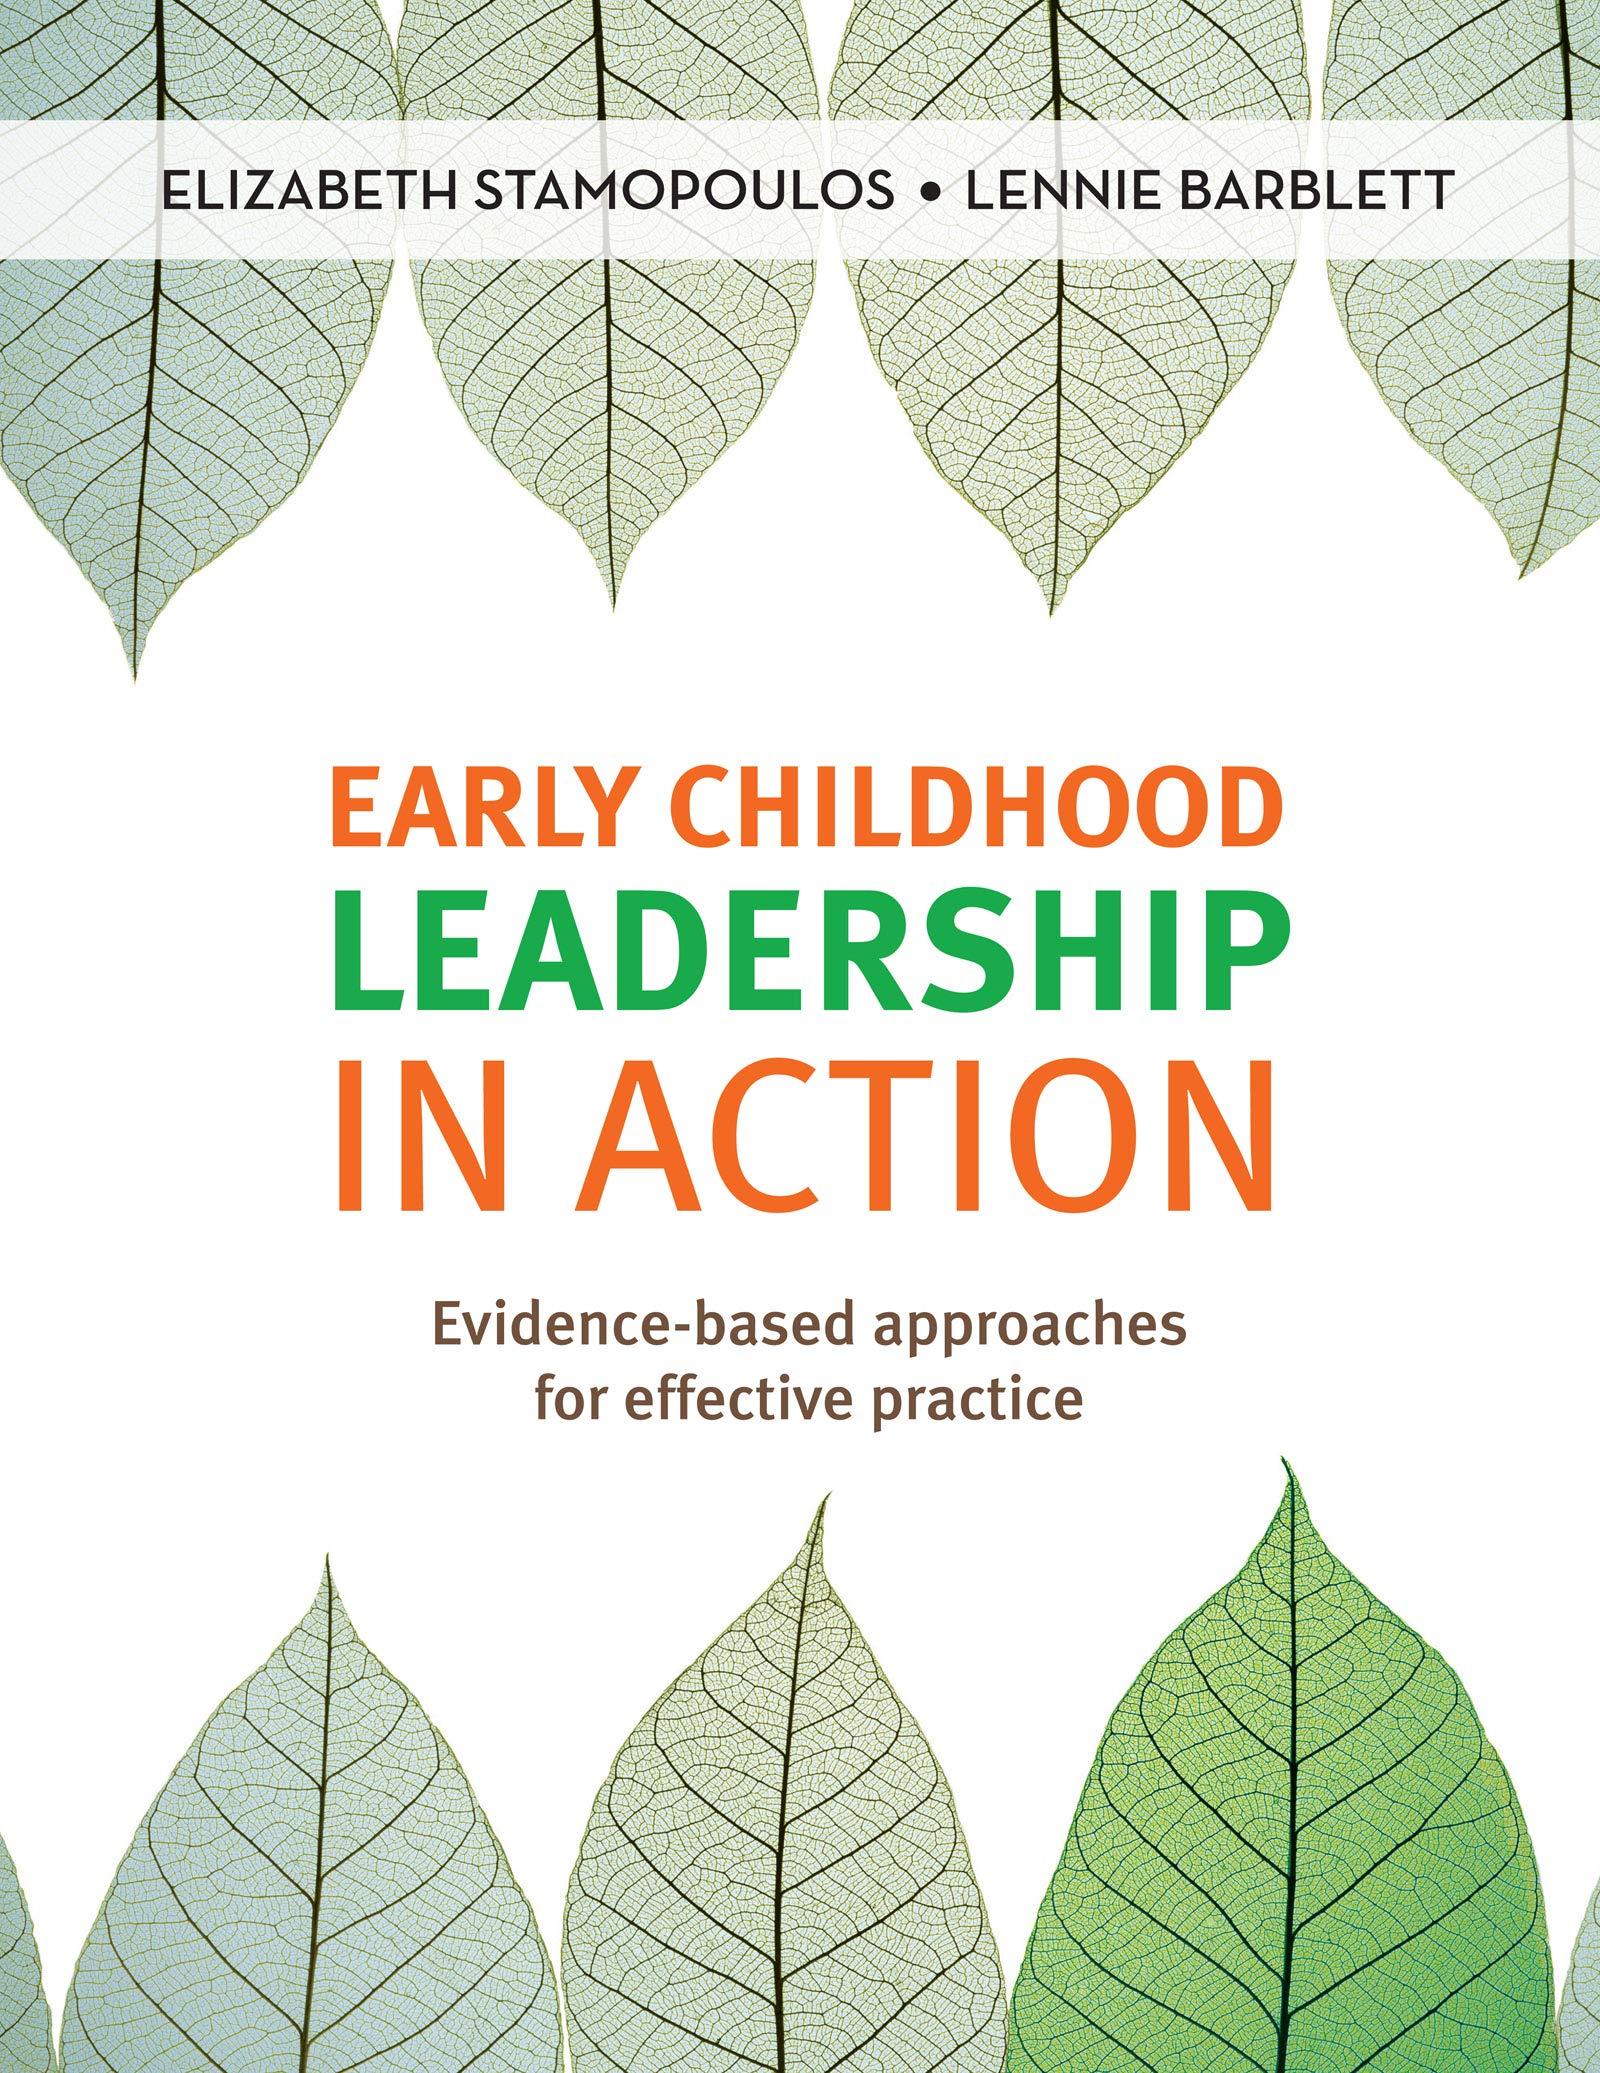 early childhood leadership in action: evidence-based approaches for effective practice 1st edition lennie